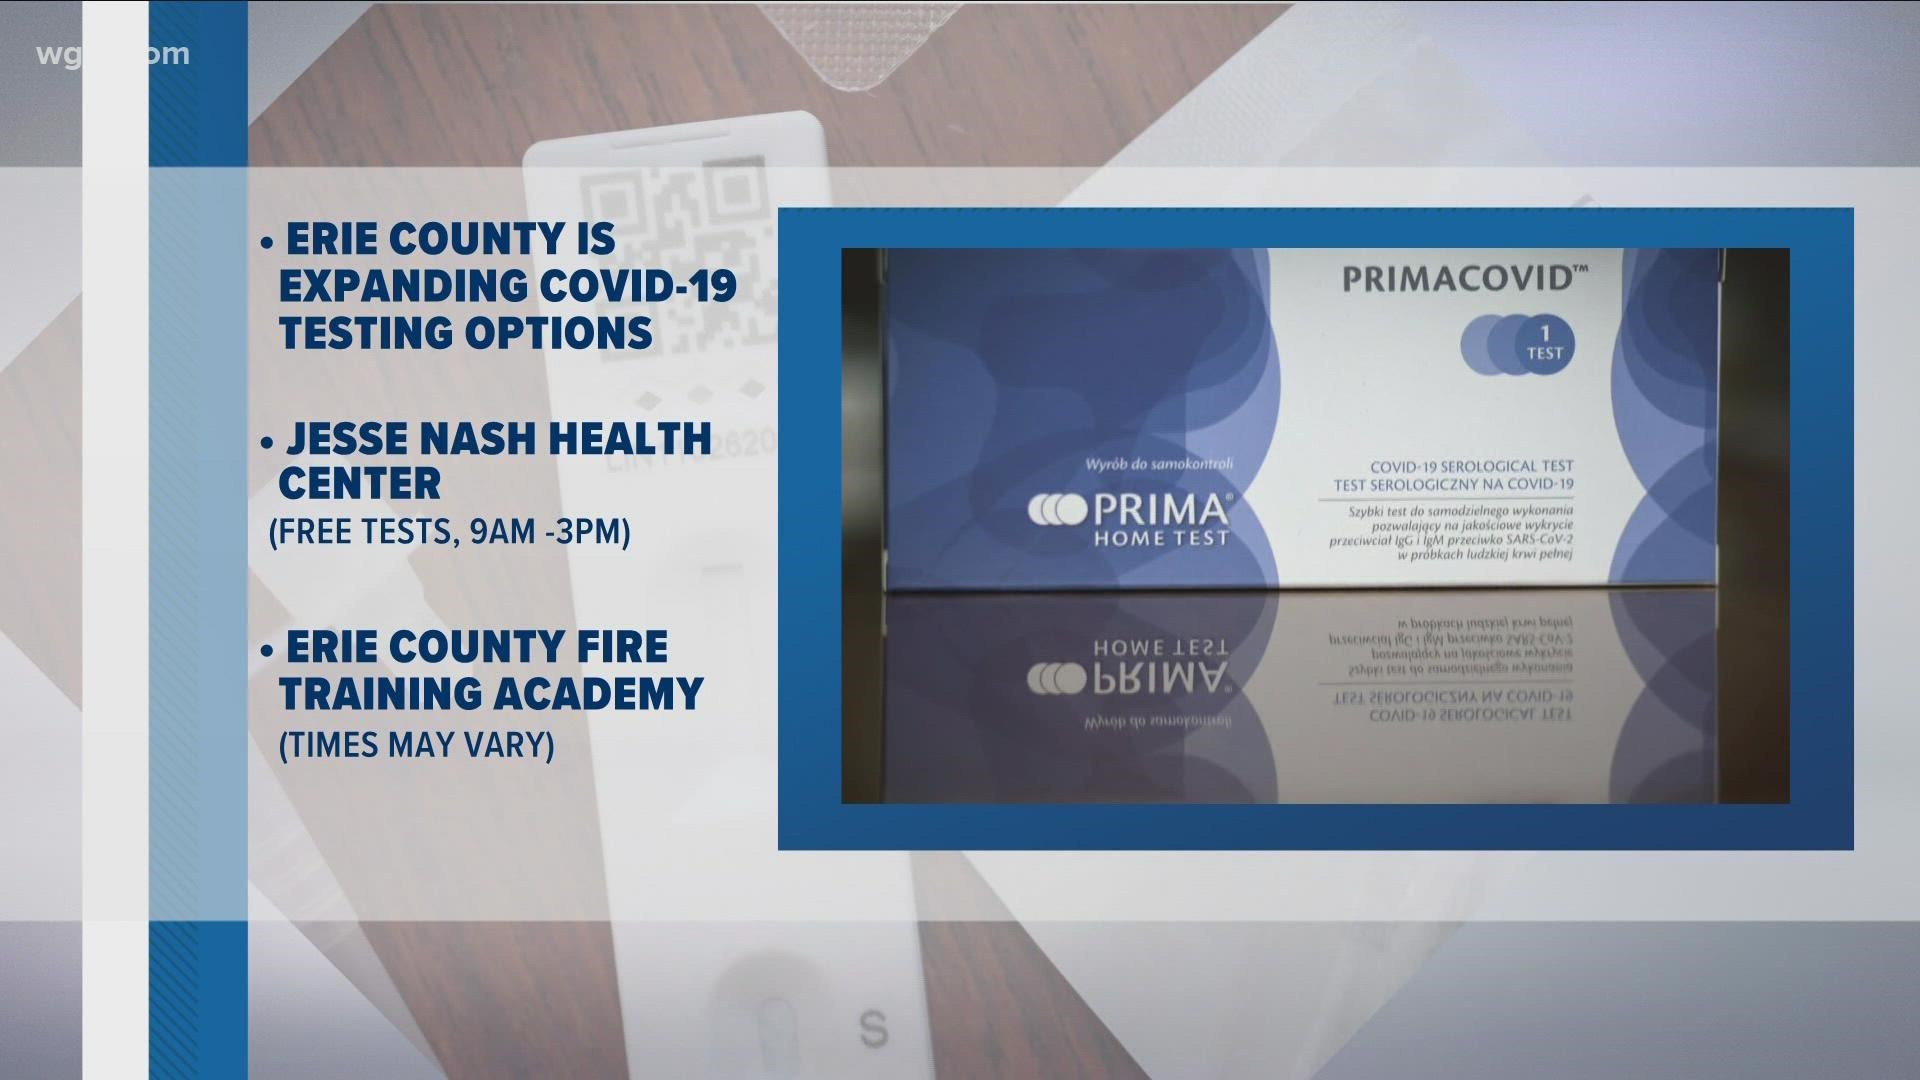 Erie County is expanding COVID-19 testing options. Two new sites will be opening up with no appointments required.